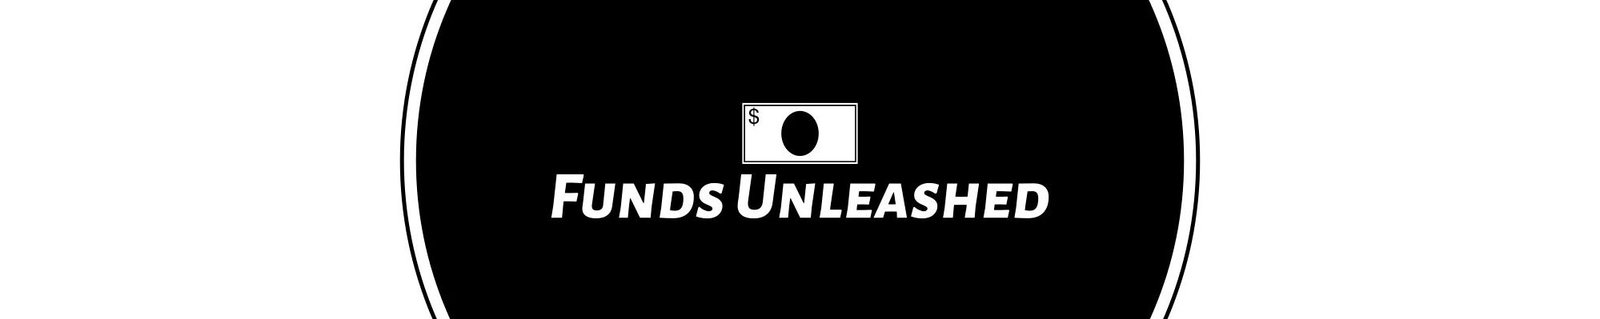 funds unleashed